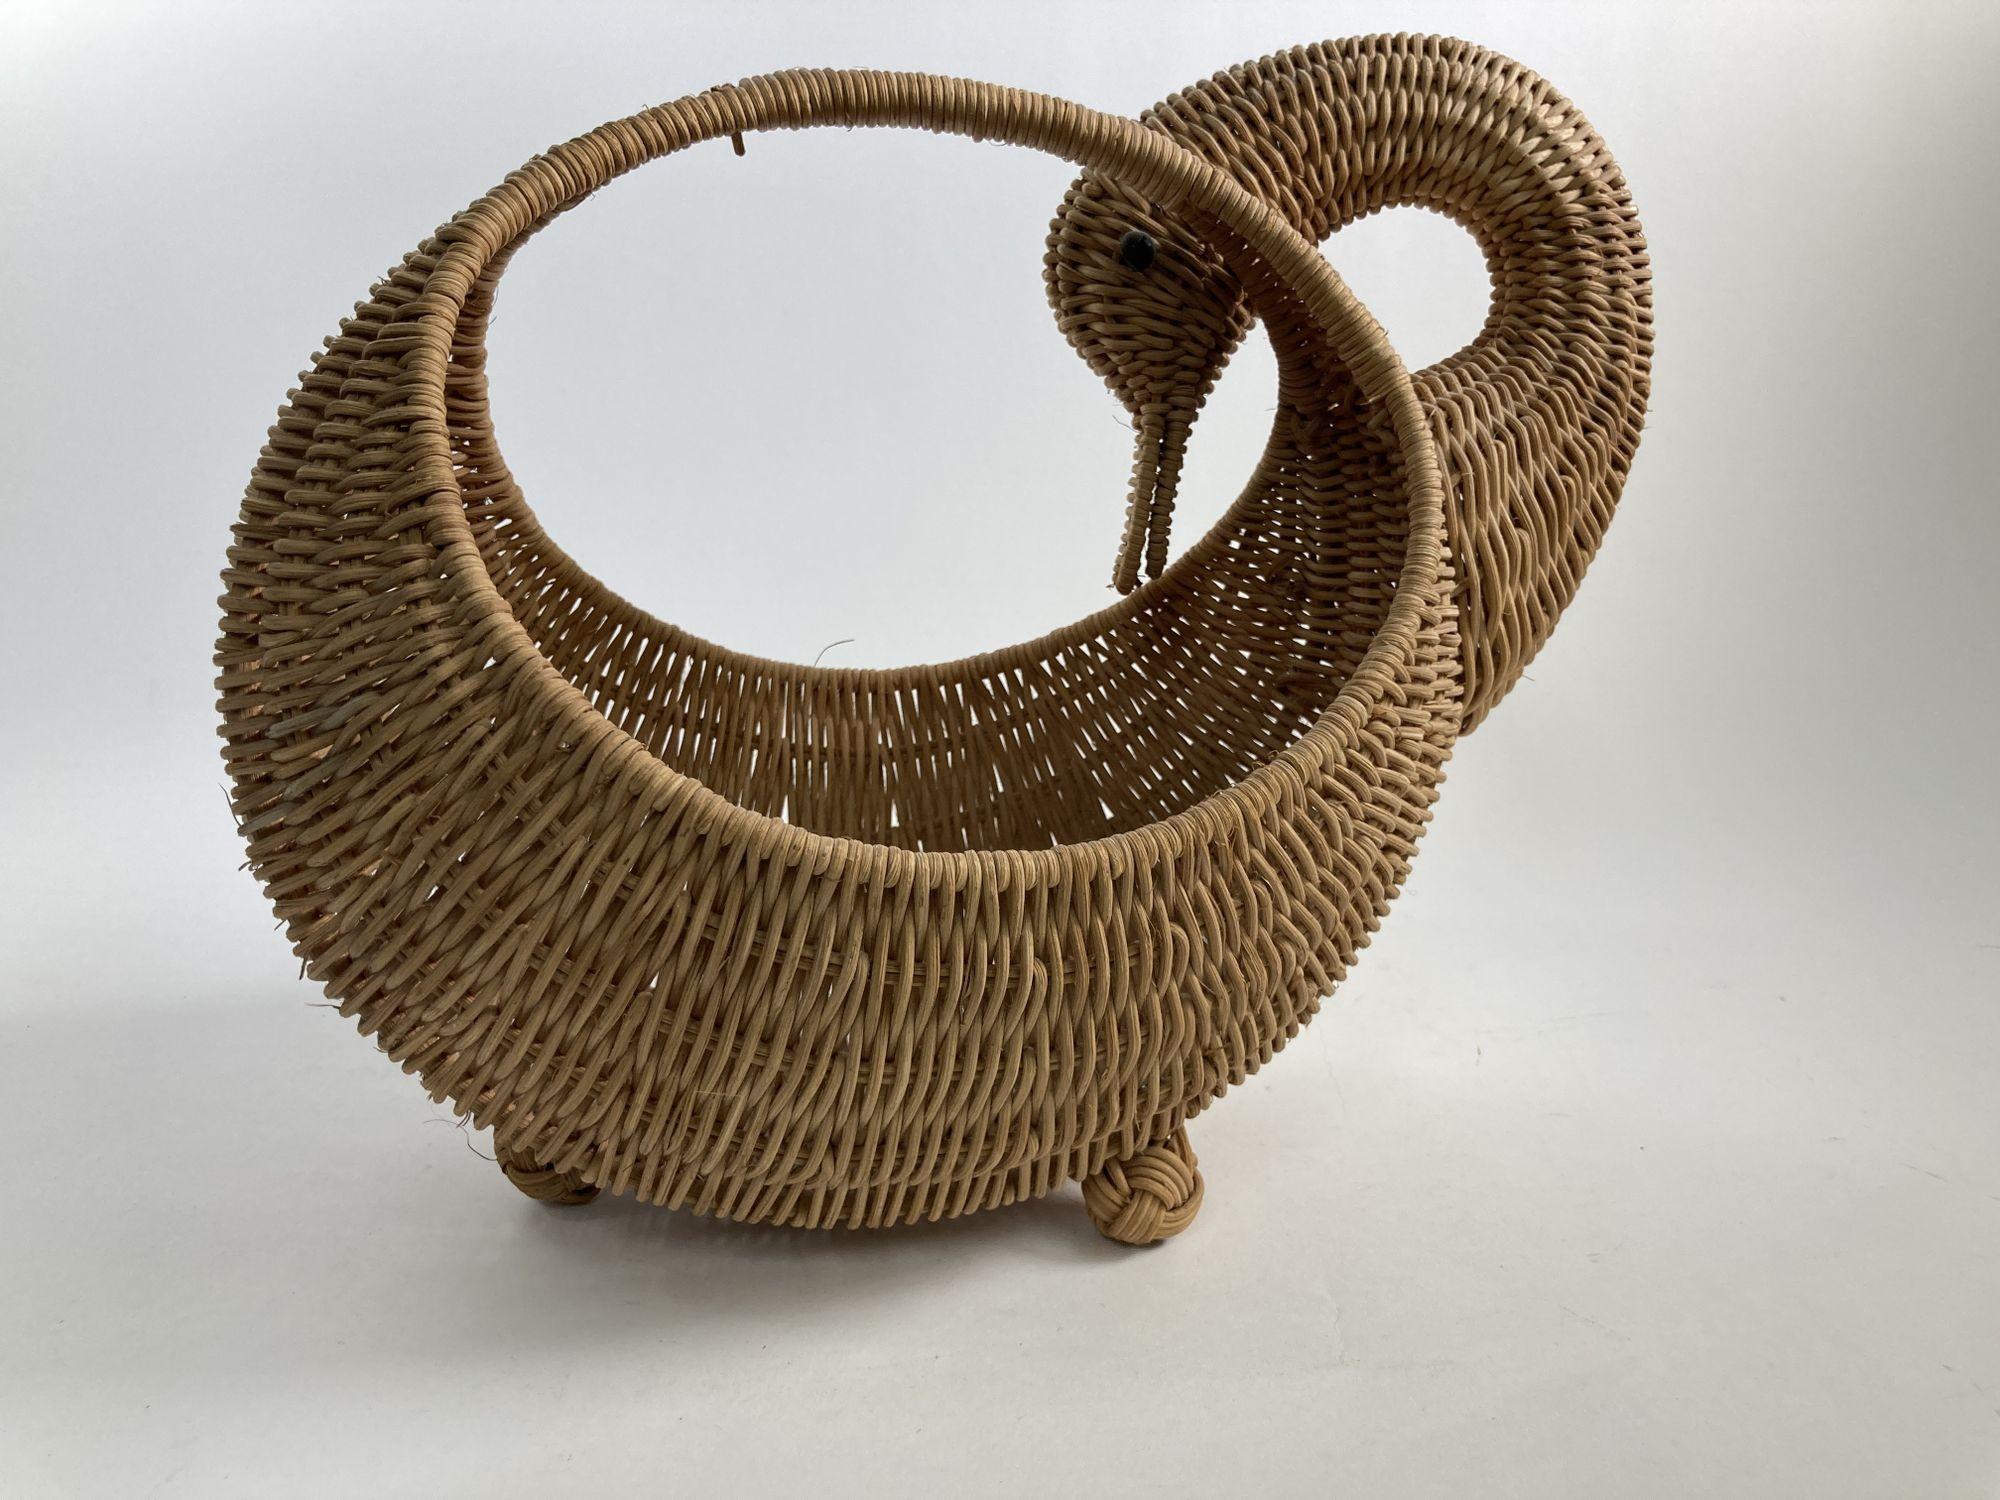 Hand-Crafted Vintage Wicker Woven Duck Motif Basket with Handle